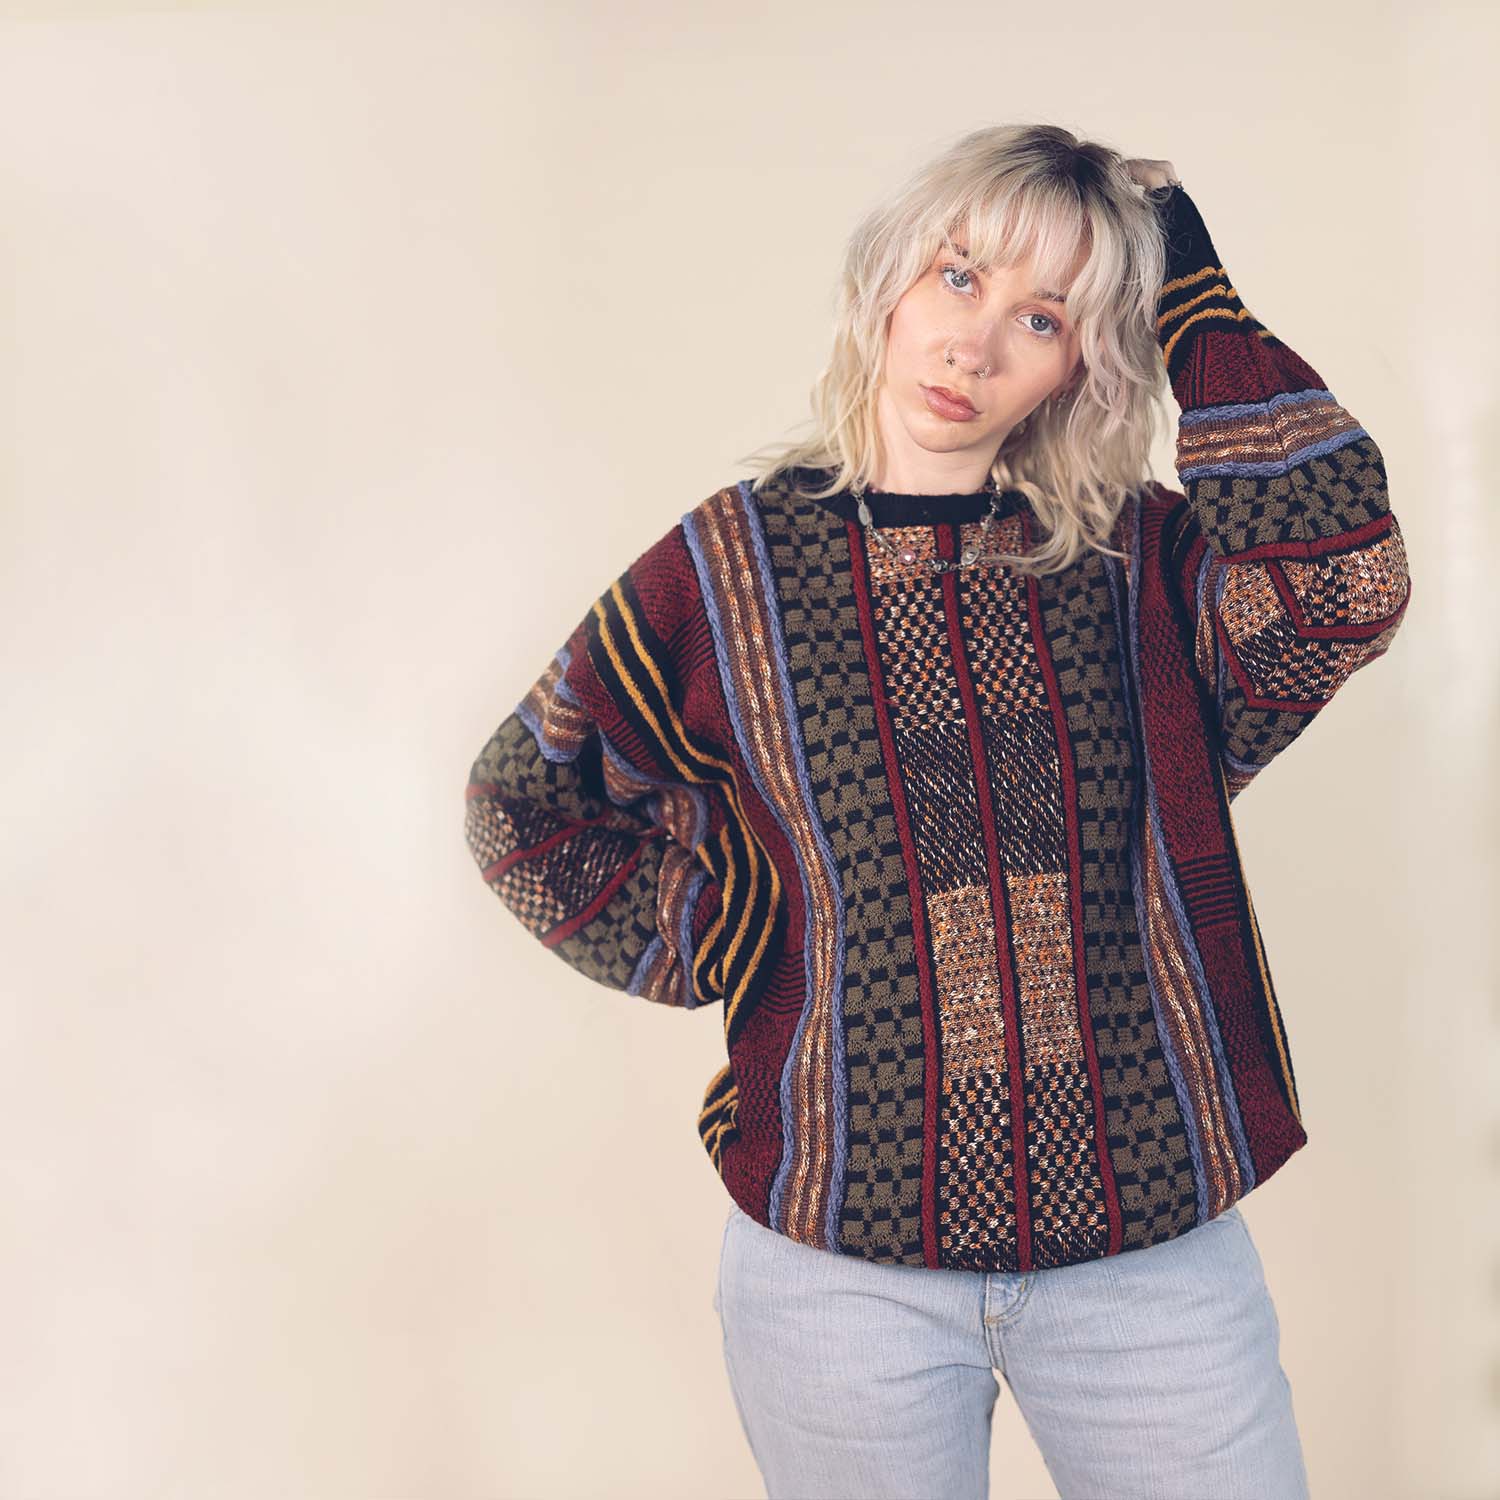 Collectionpage Branded Knitwear for women